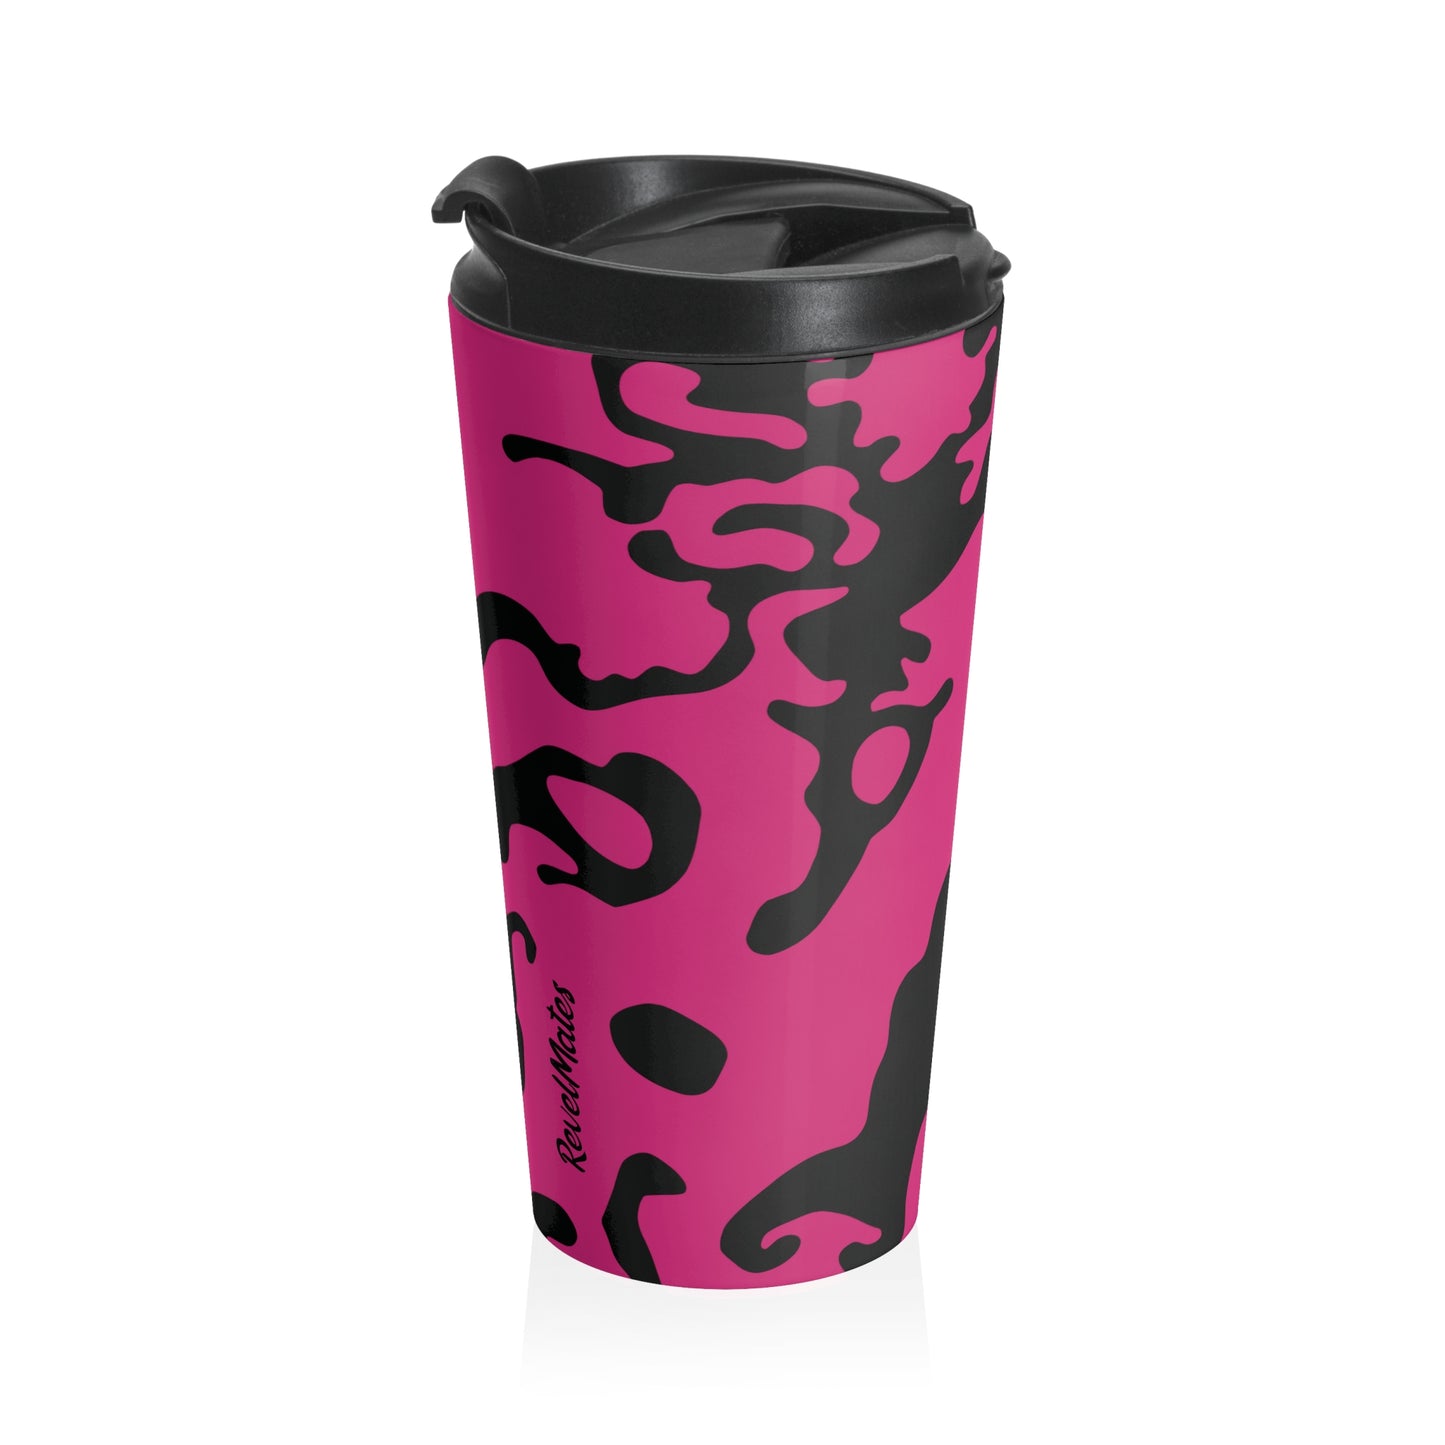 Stainless Steel Travel Mug With Cup 15oz (440ml)| Camouflage Fuchsia & Black Design